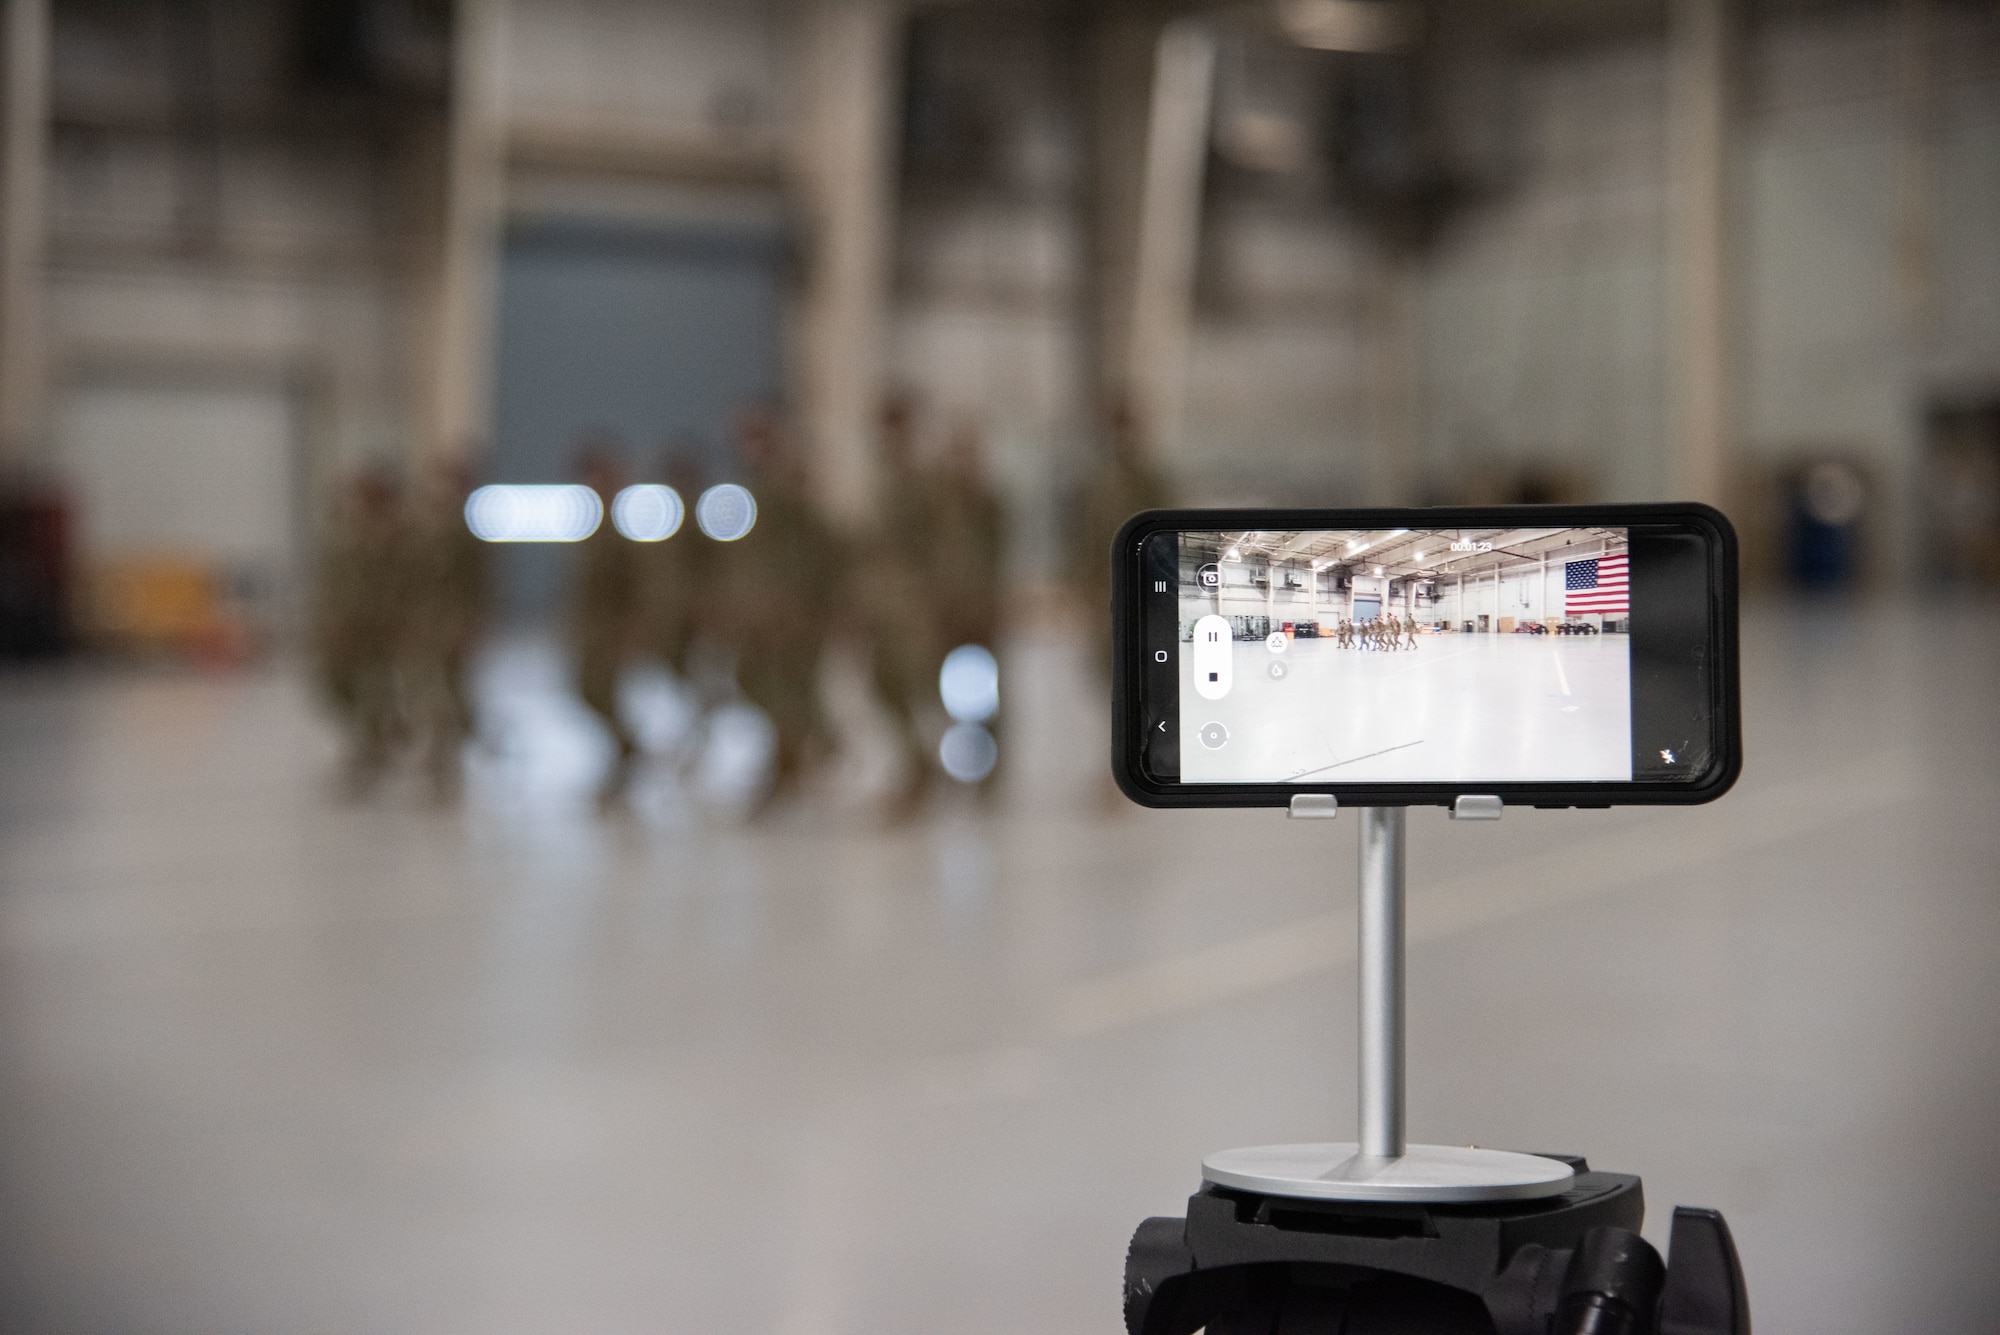 A cellular phone records U.S. Air Force Airmen as they execute drill movements for a drill competition.